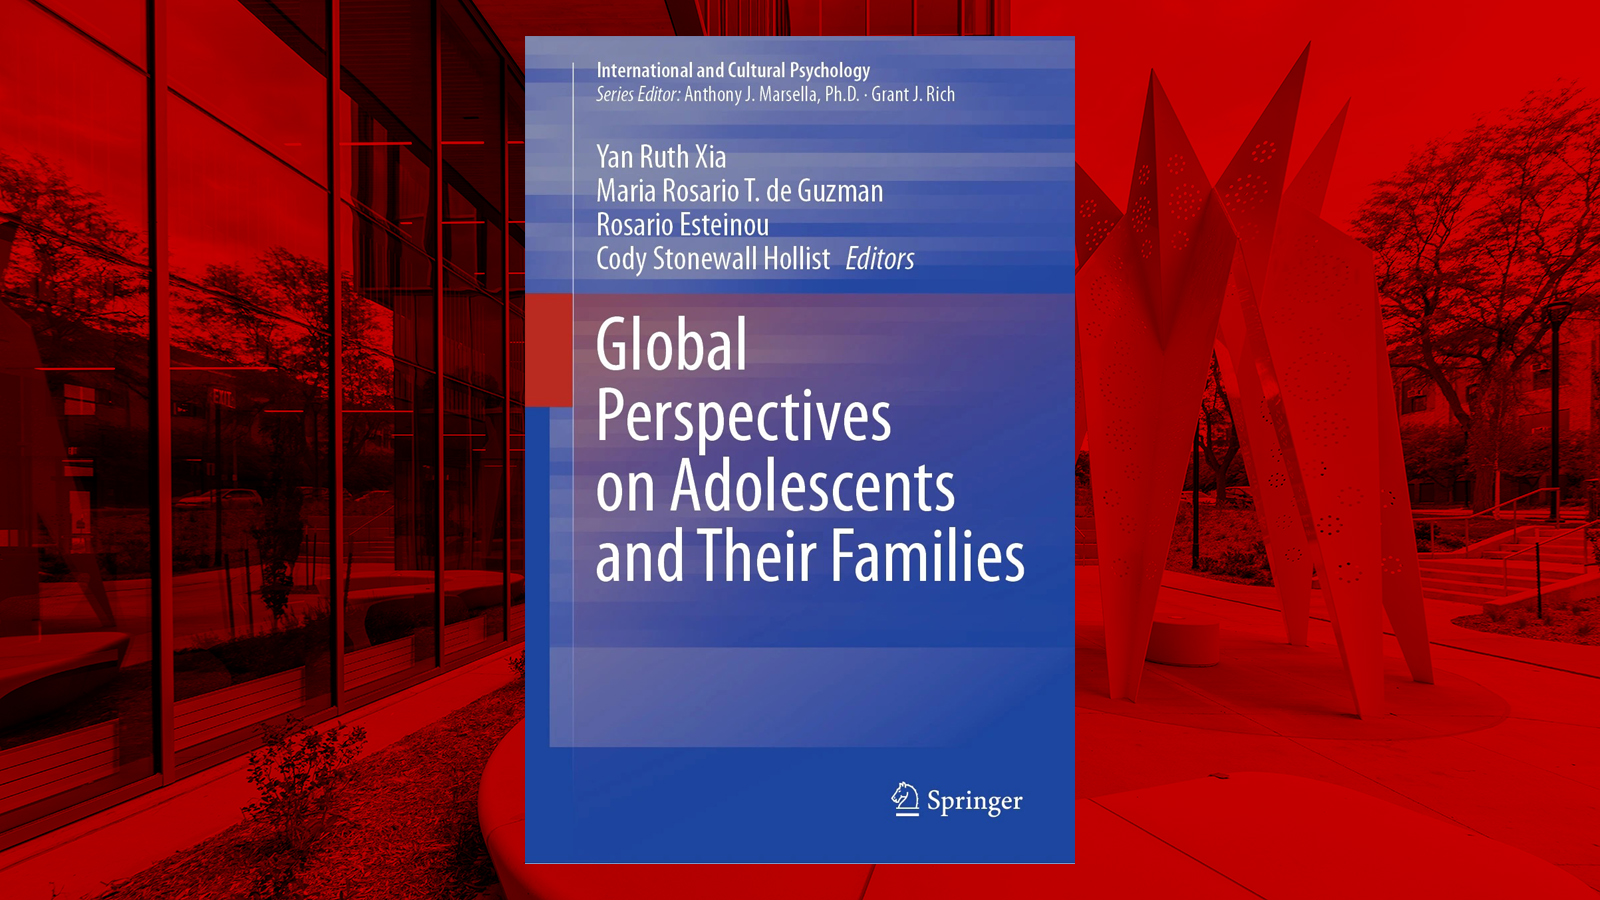 photo of Carolyn Pope Edwards Hall with red overlay in background, image of cover of "Global Perspectives on Adolescents and their Families" in center